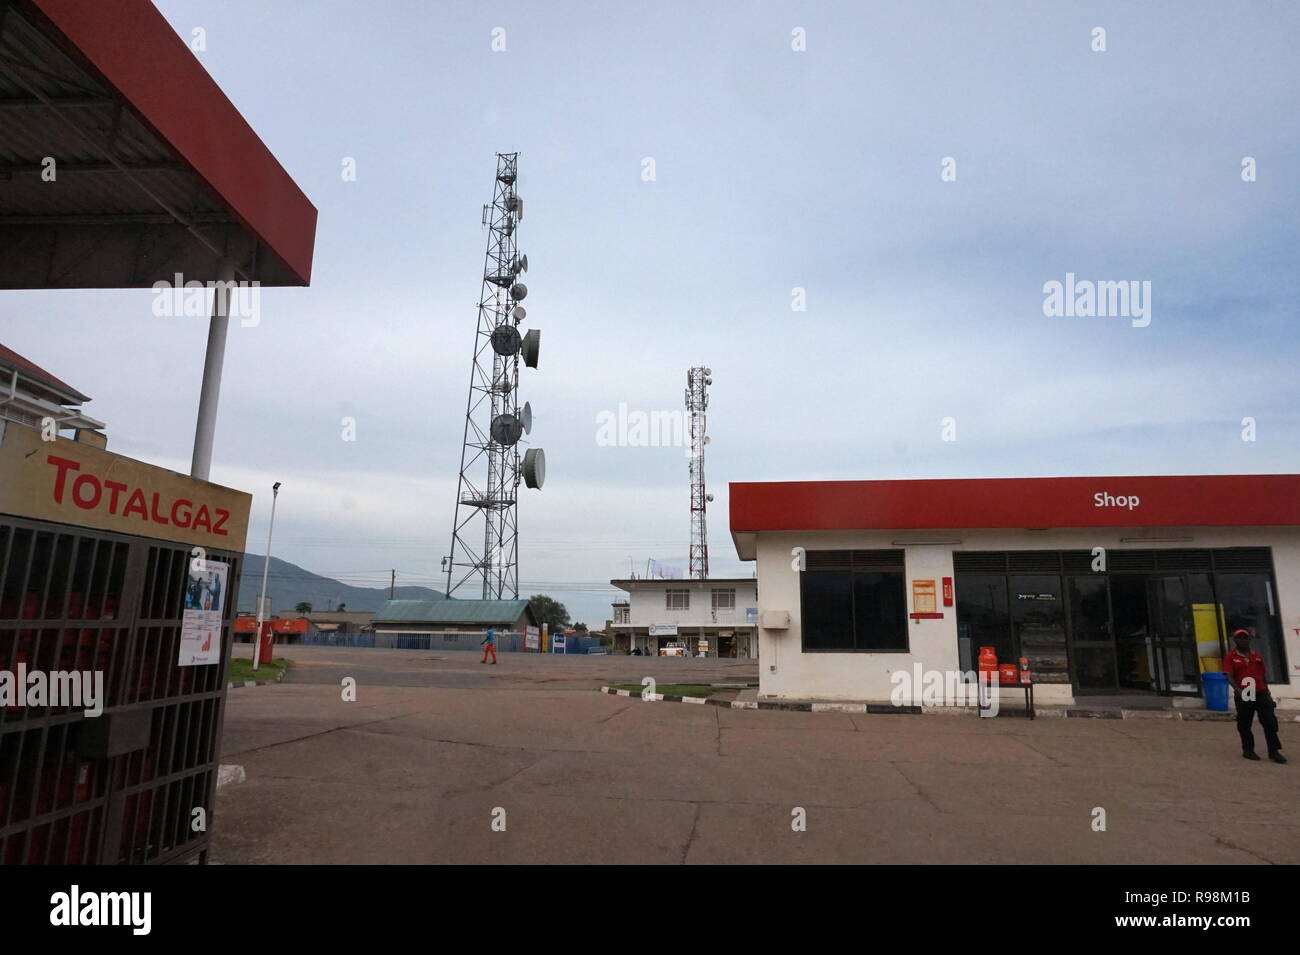 A telecoms aerial in a rural town and a petrol station in Uganda Stock Photo